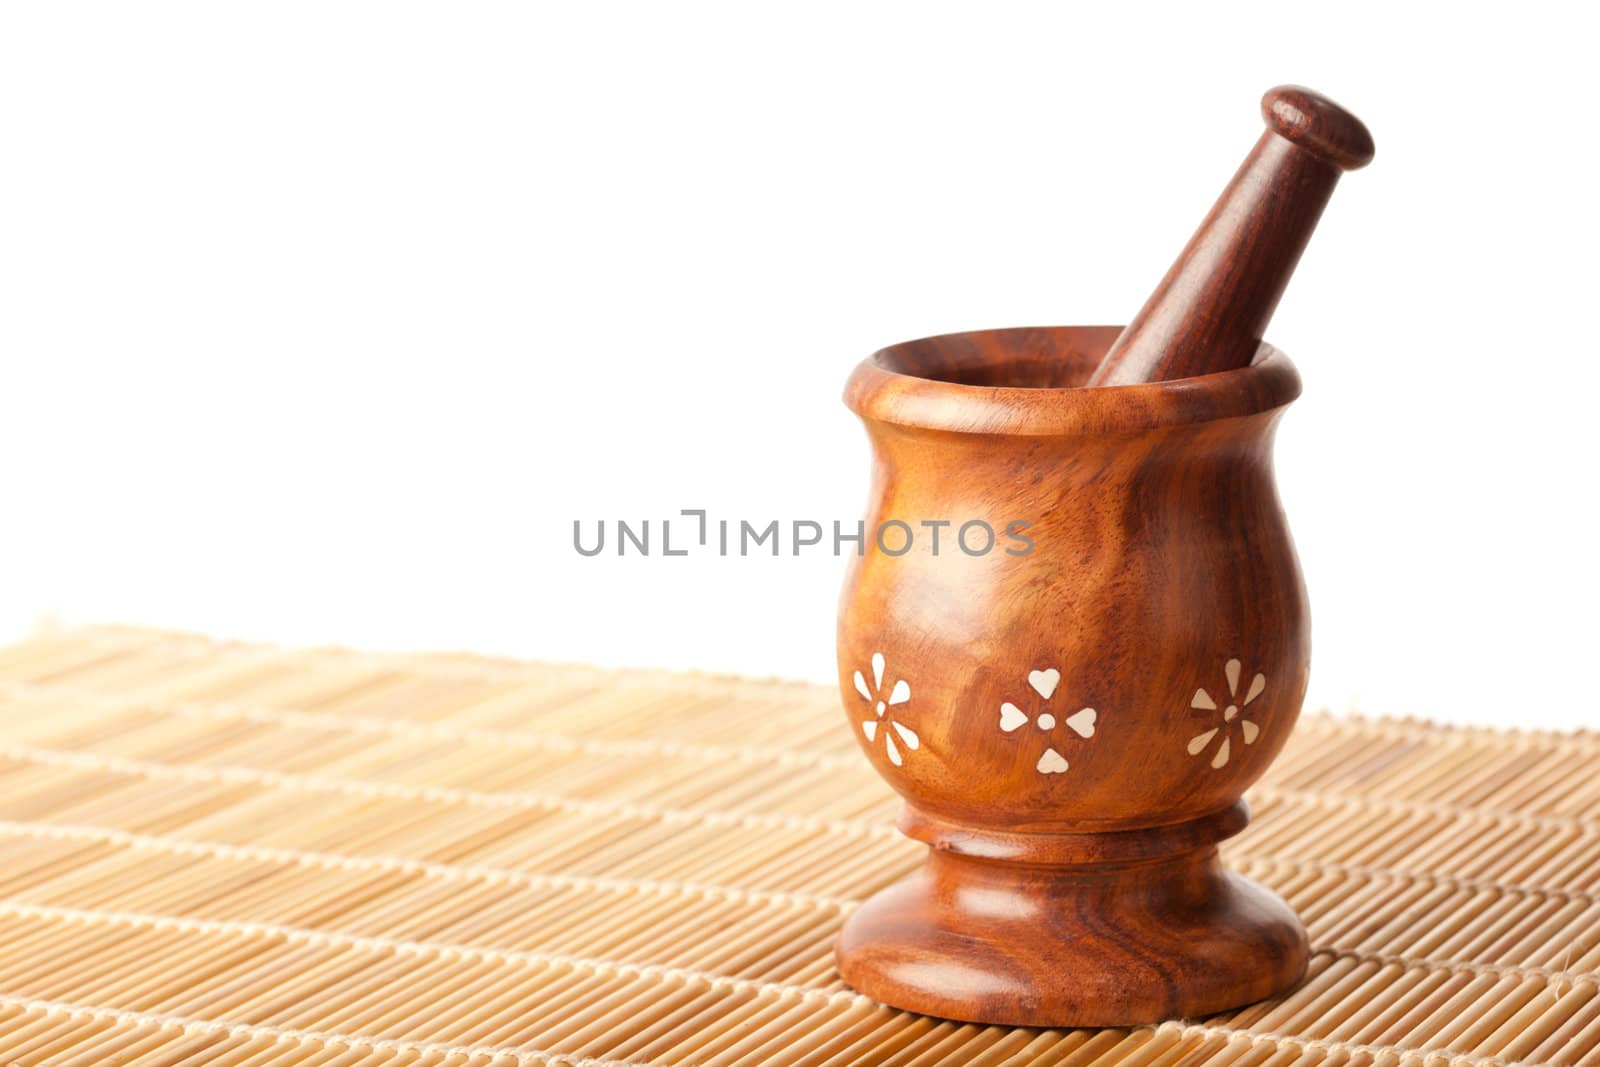 Wooden mortar with pestle on bamboo mat